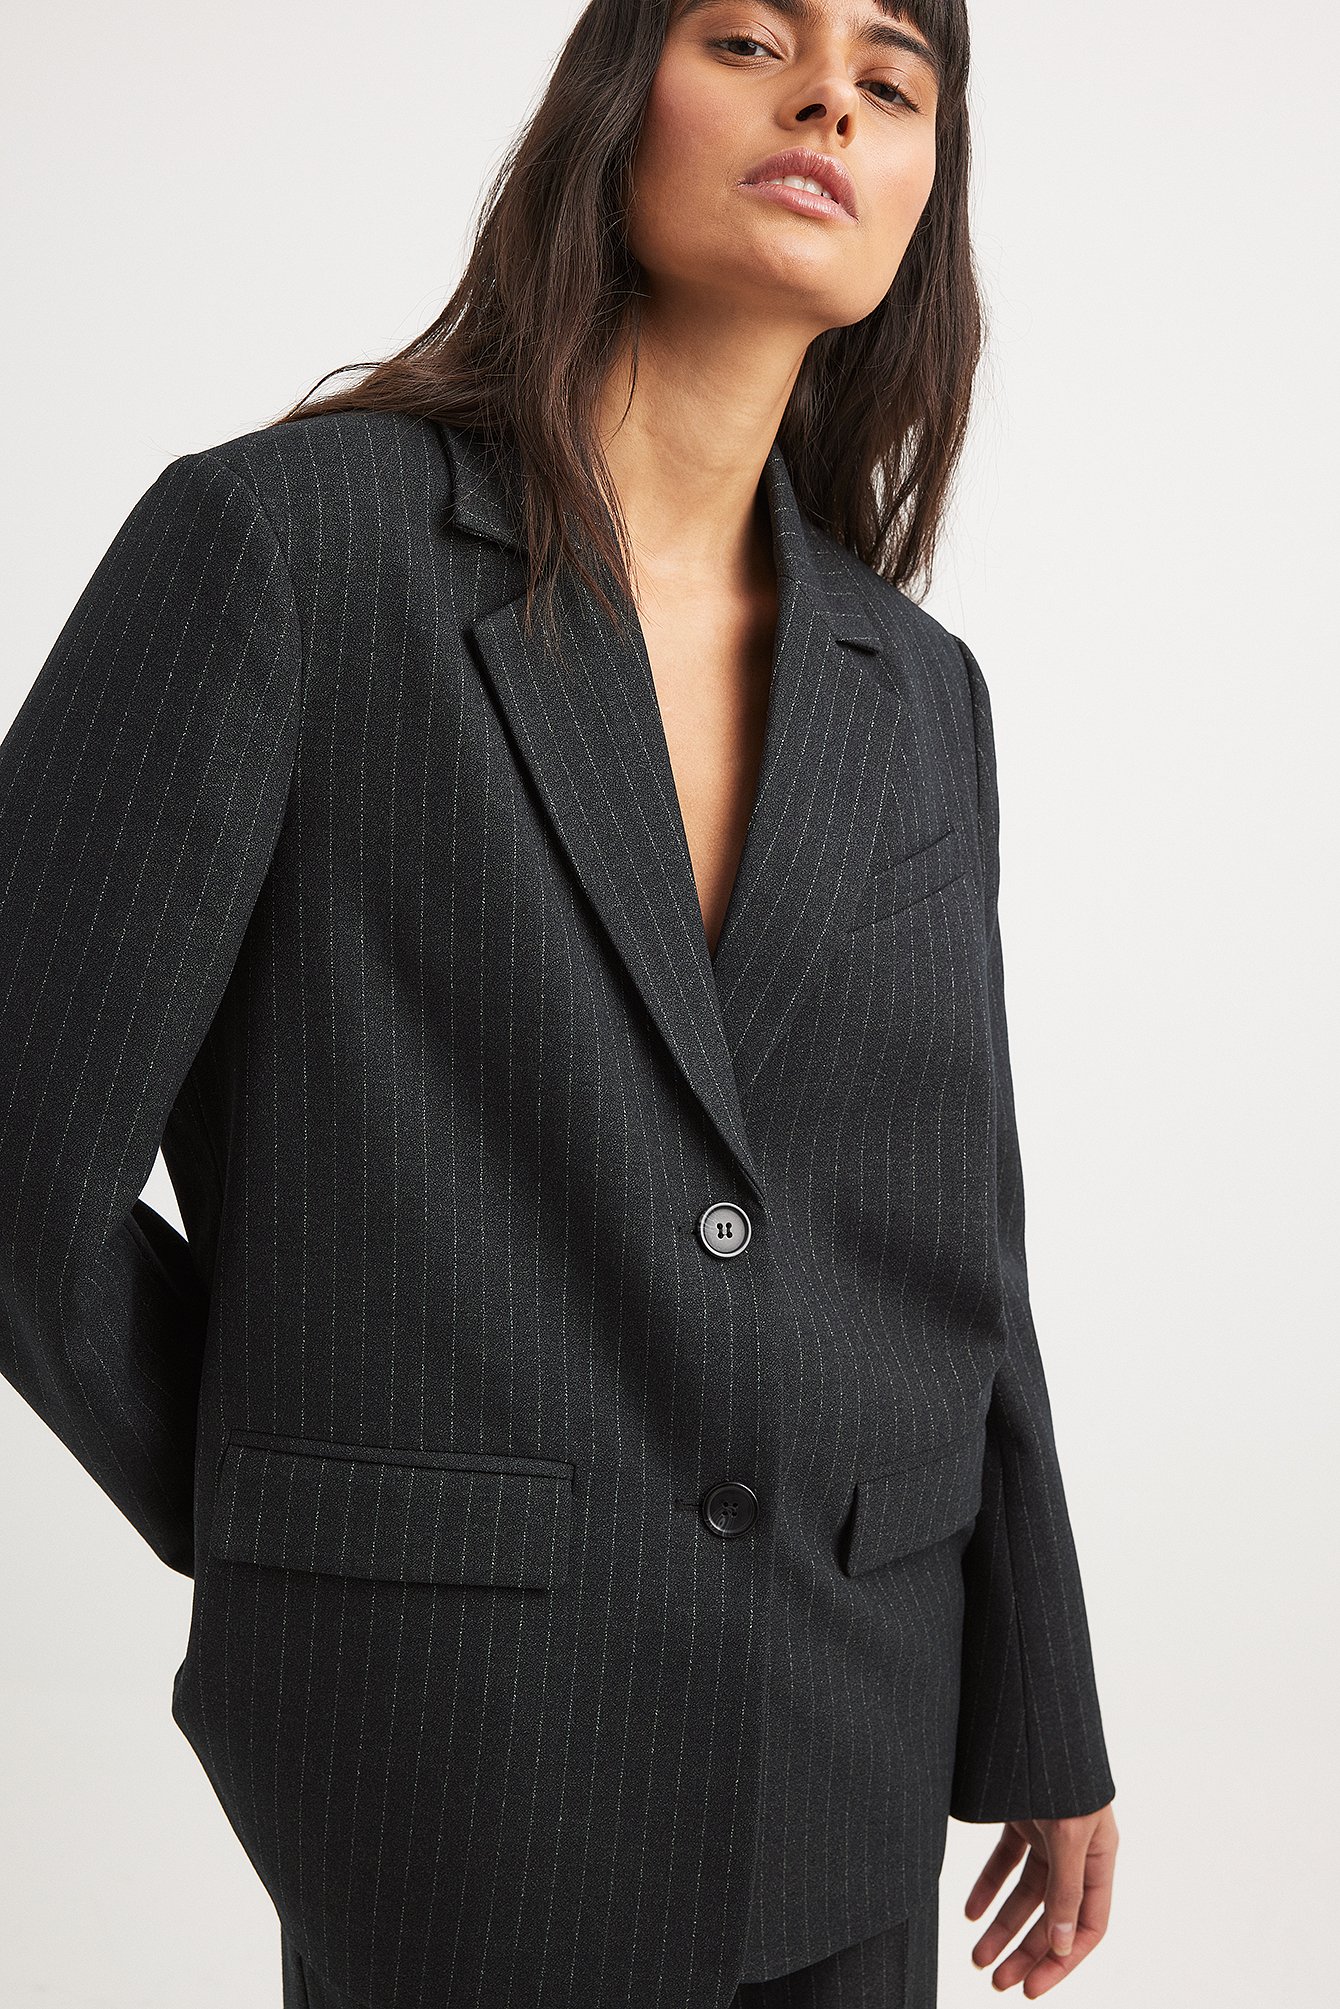 Women's Suits | Made To Measure | Tailored - Godwin Charli